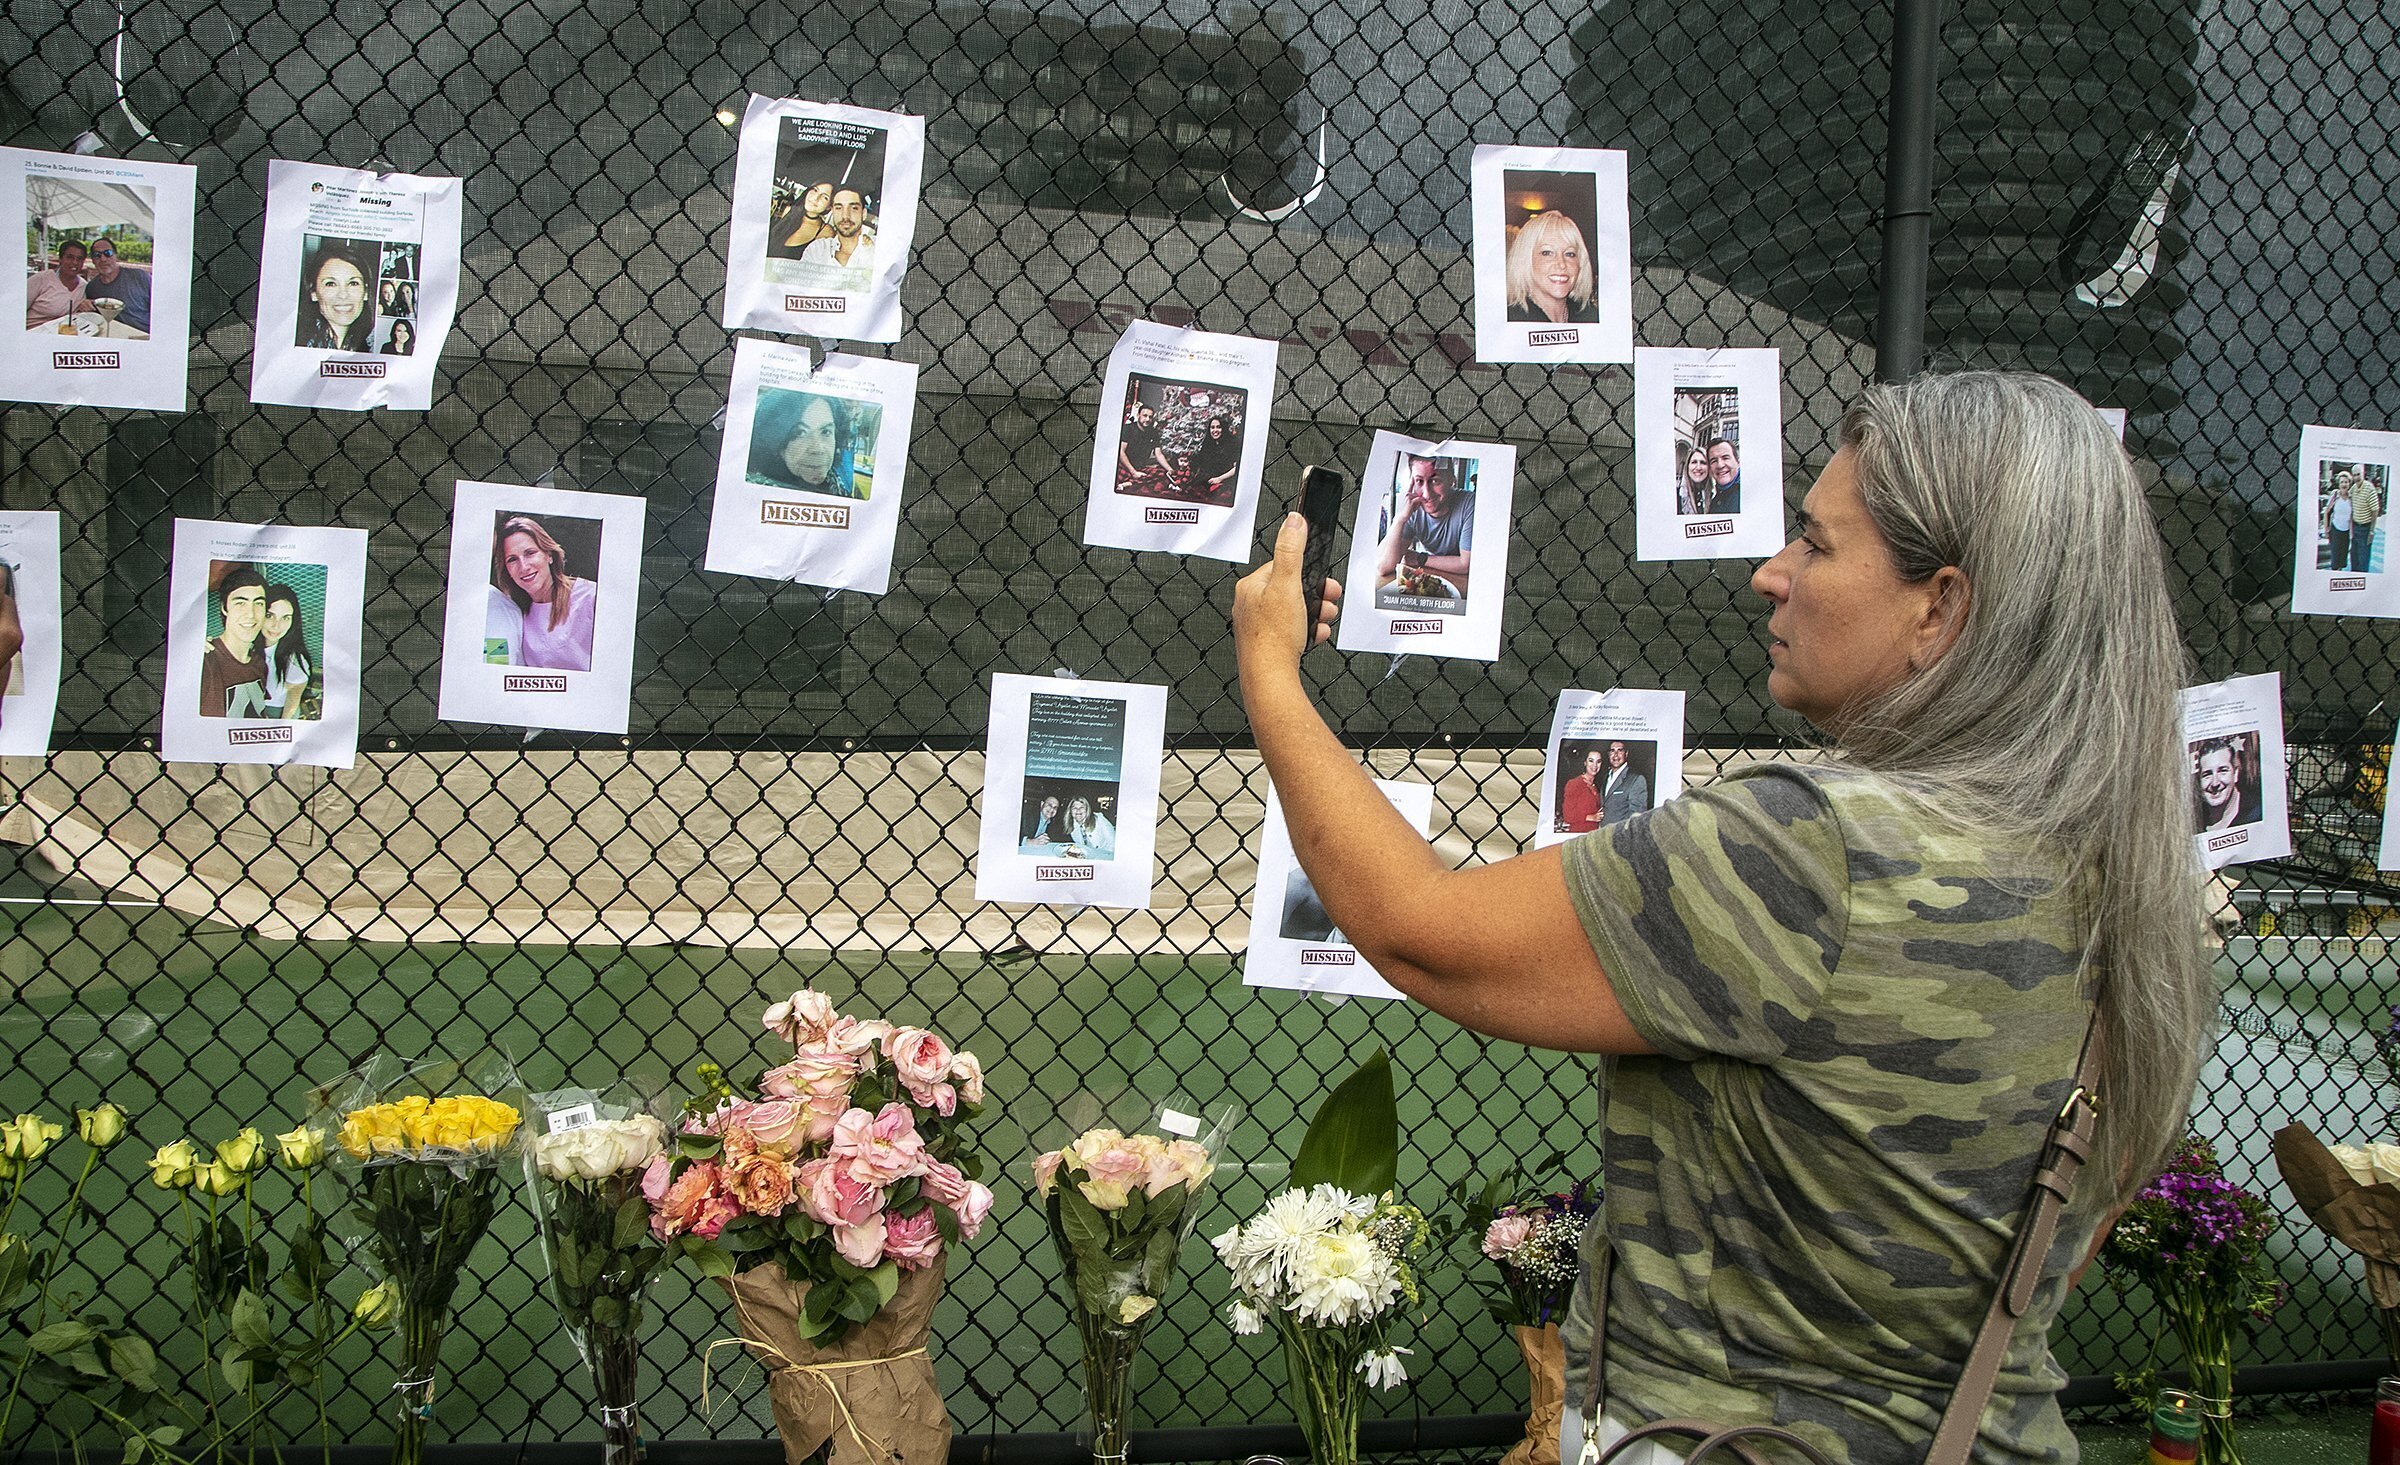 Photos of missing people are posted on a fence near the site of the Champlain Towers South Condo after the building collapsed Friday, June 25, 2021 in Surfside, Fla. The apartment building partially collapsed on Thursday, June 24. (Pedro Portal/Miami Herald via AP)